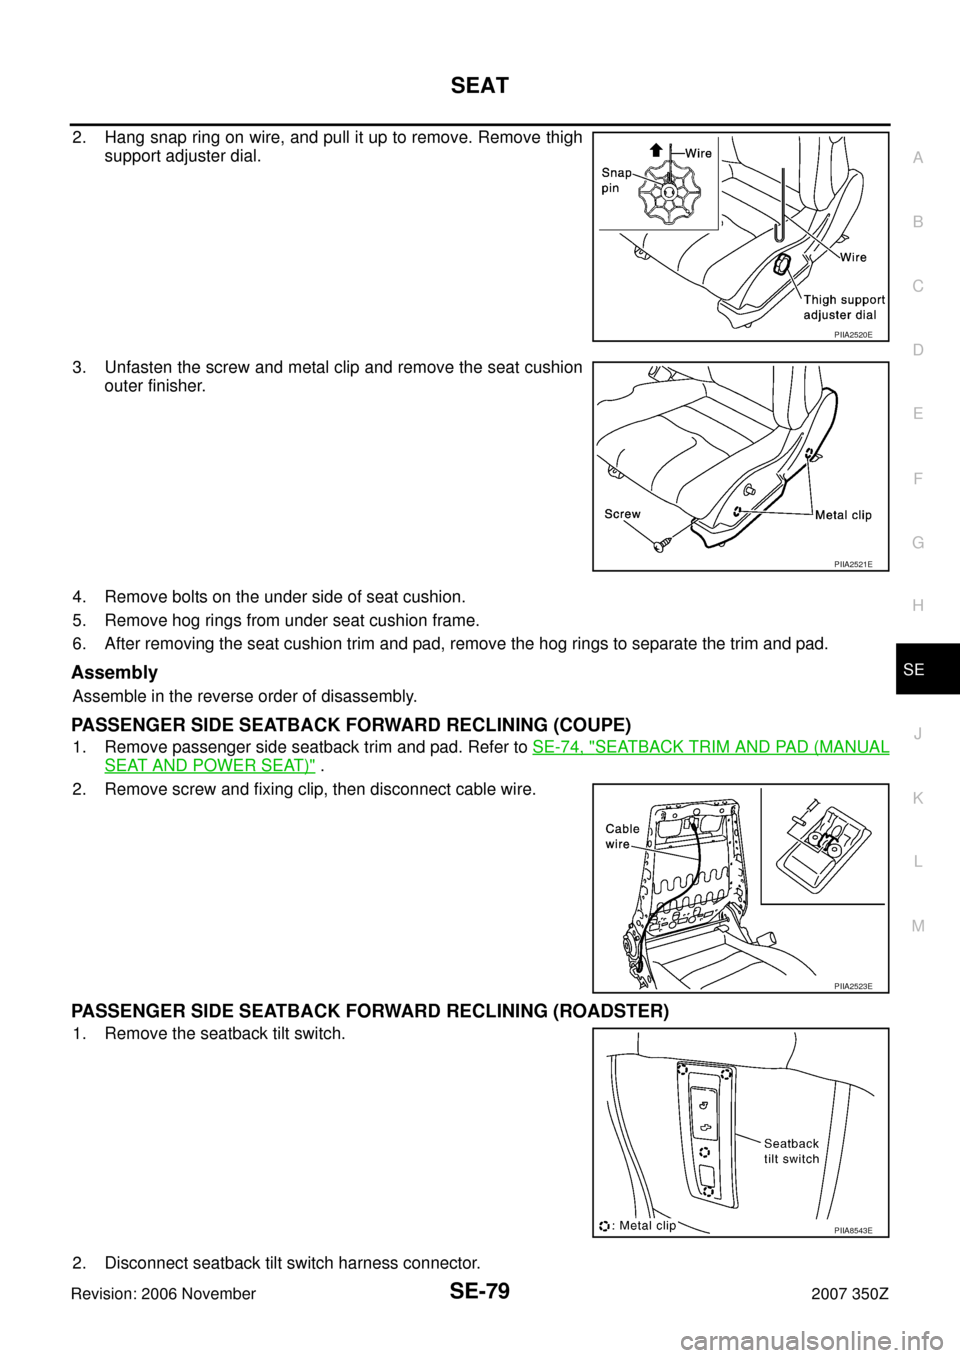 NISSAN 350Z 2007 Z33 Seat Manual PDF SEAT
SE-79
C
D
E
F
G
H
J
K
L
MA
B
SE
Revision: 2006 November2007 350Z
2. Hang snap ring on wire, and pull it up to remove. Remove thigh
support adjuster dial.
3. Unfasten the screw and metal clip and 